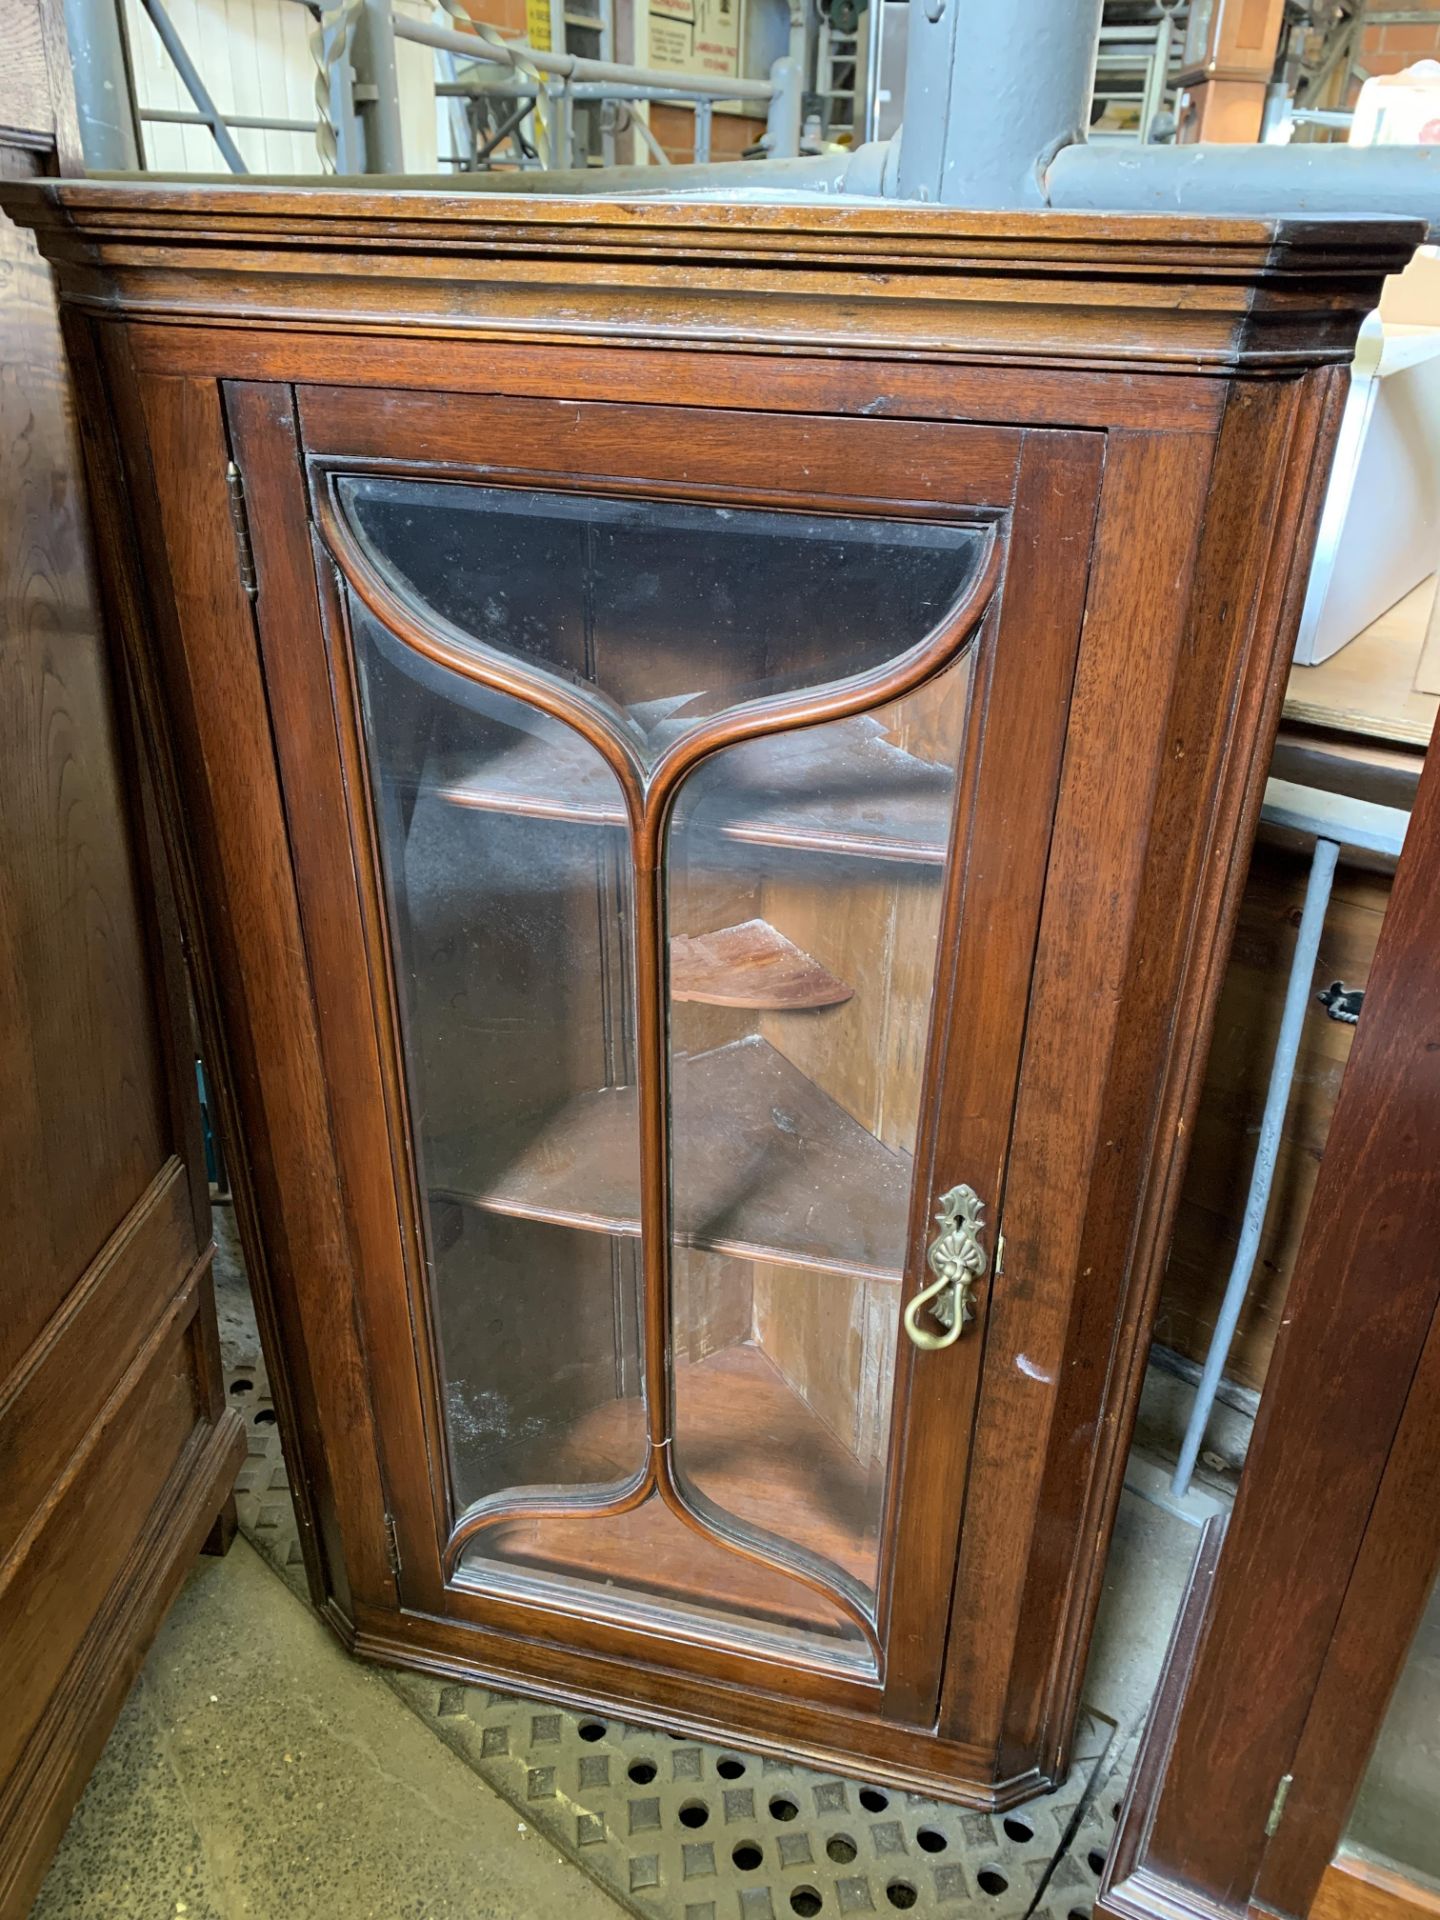 Mahogany bevelled glass fronted wall mounted corner cabinet - Image 2 of 4